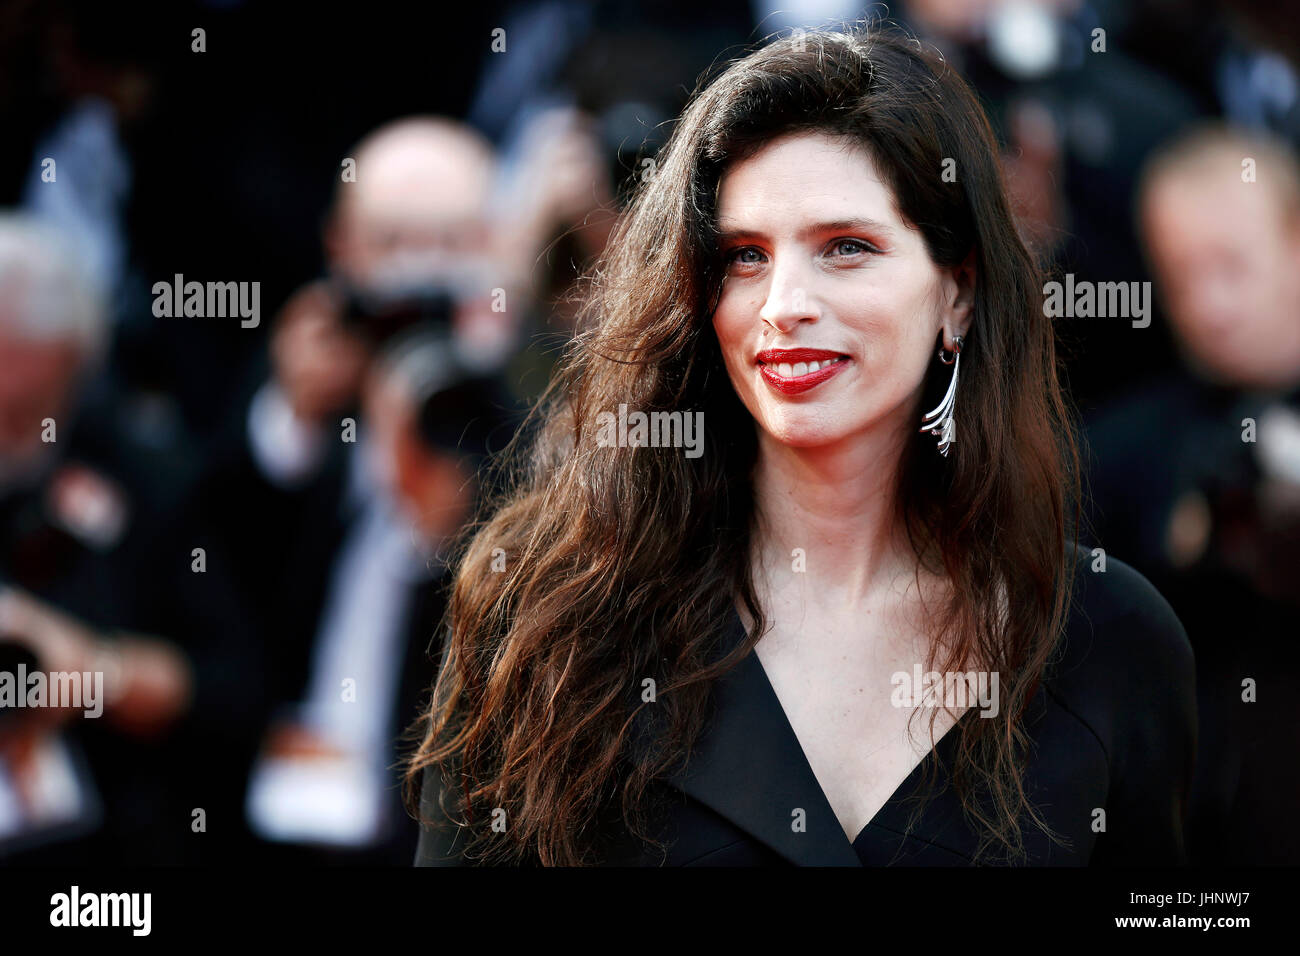 CANNES, FRANCE - MAY 23: Maiwenn Le Besco attends the 70th Anniversary of the 70th Cannes Film Festival at Palais des Festivals on May 23, 2017 in Can Stock Photo